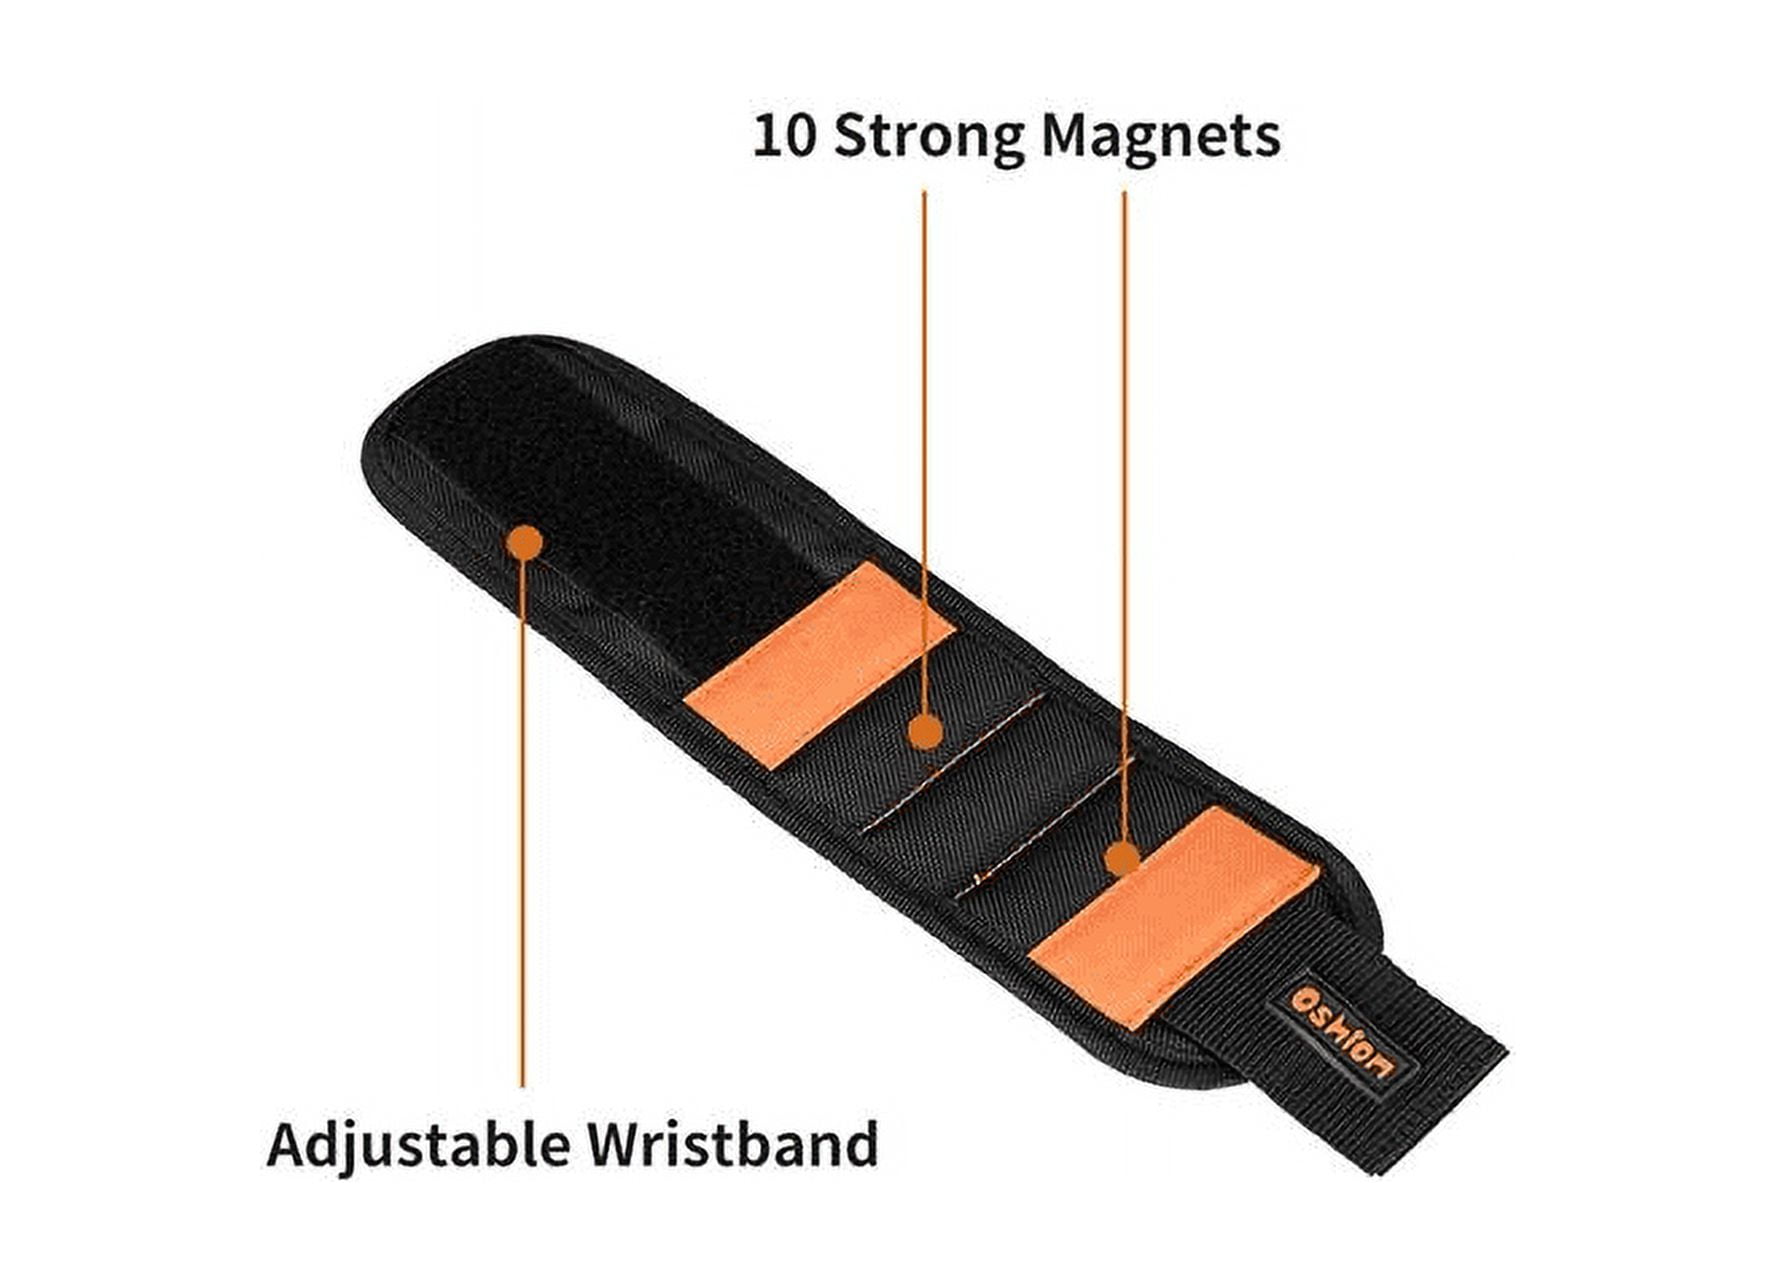 Magpie Magnetic Wristband - 10 Extremely Powerful Magnets for Holding Screws Nails and Drill Bits Made of Enhanced Nylon for Lightweight and Durabilit